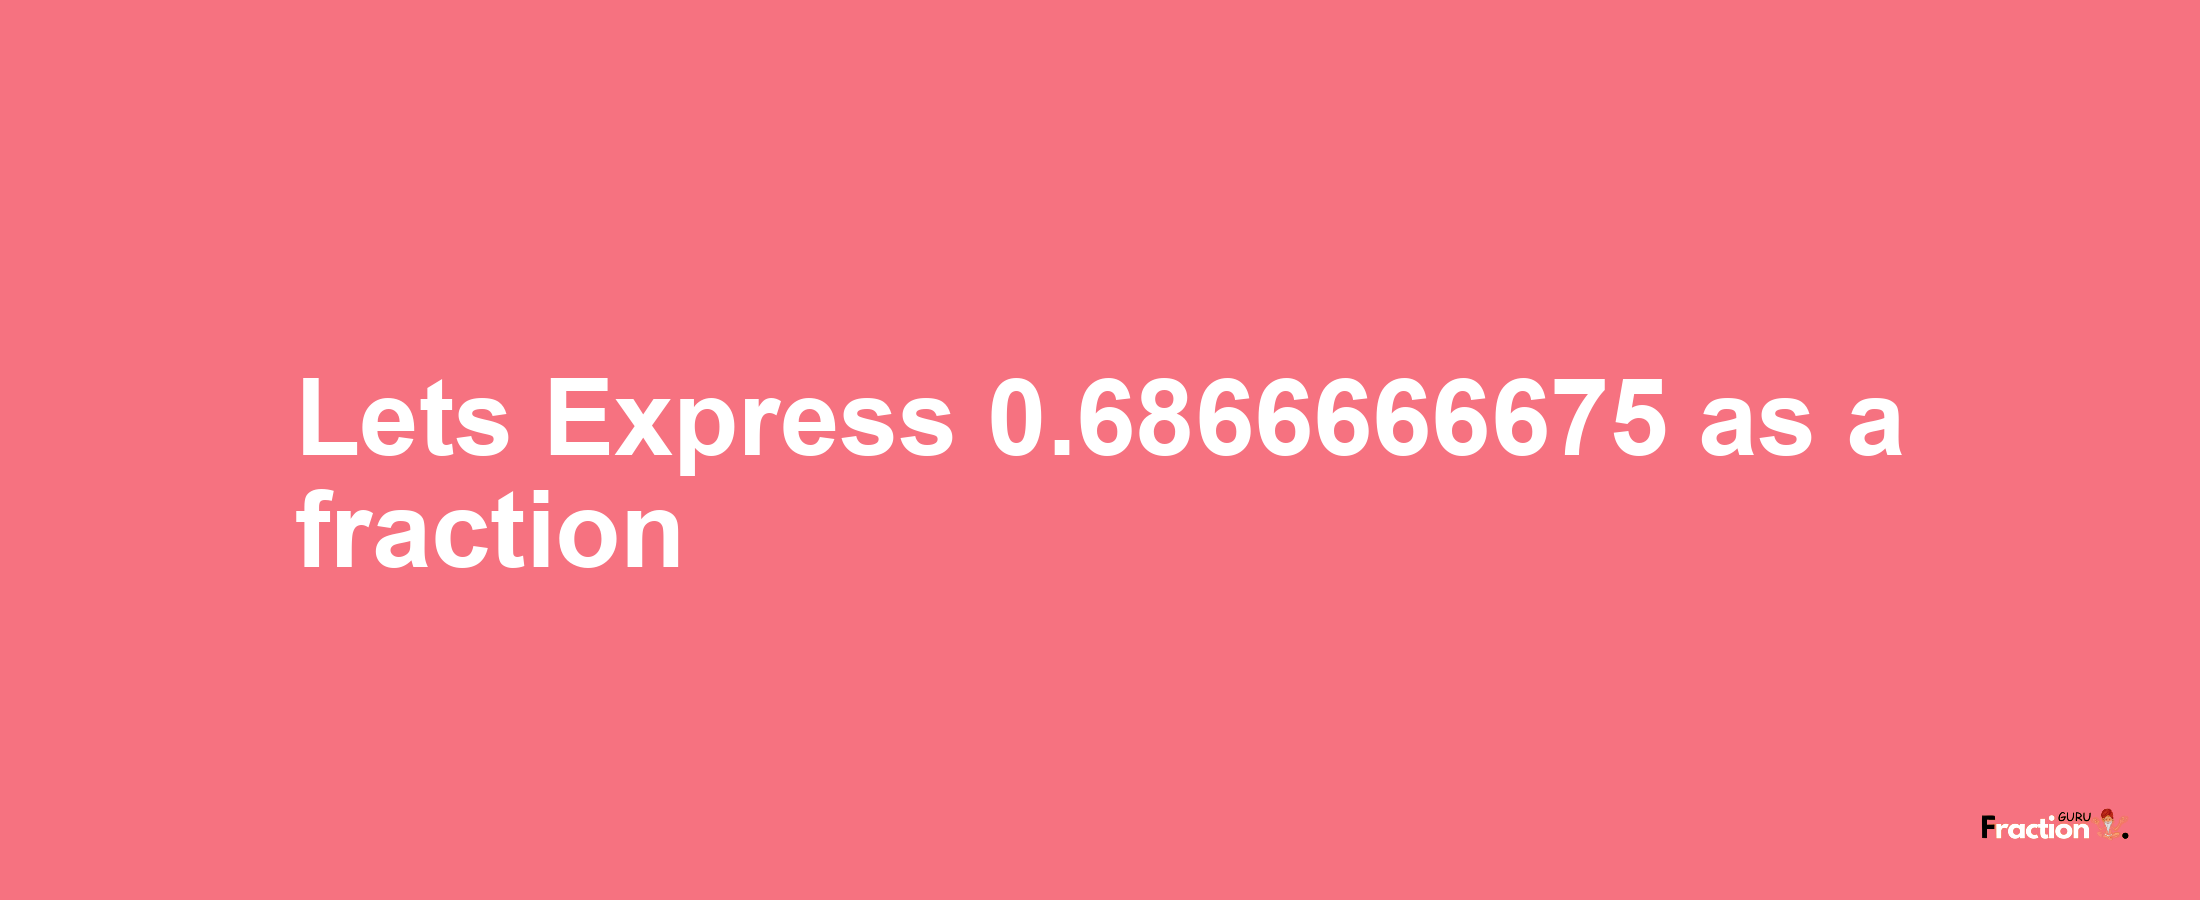 Lets Express 0.6866666675 as afraction